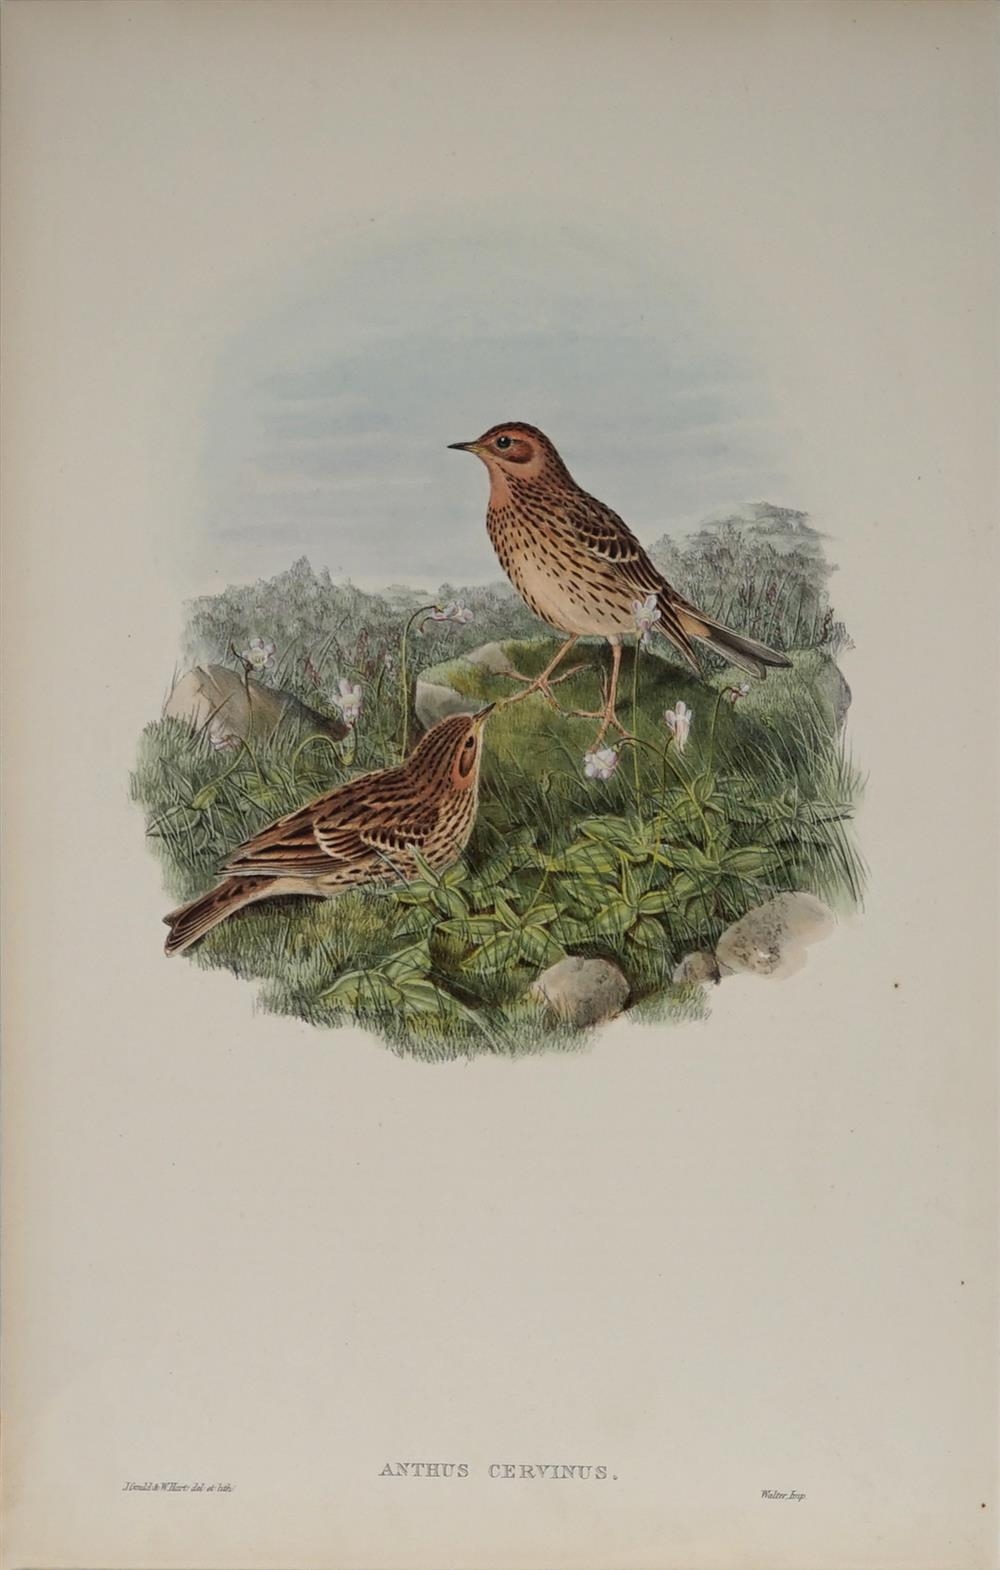 ANTHUS CERVINUS: Red-throated Pipit by John Gould